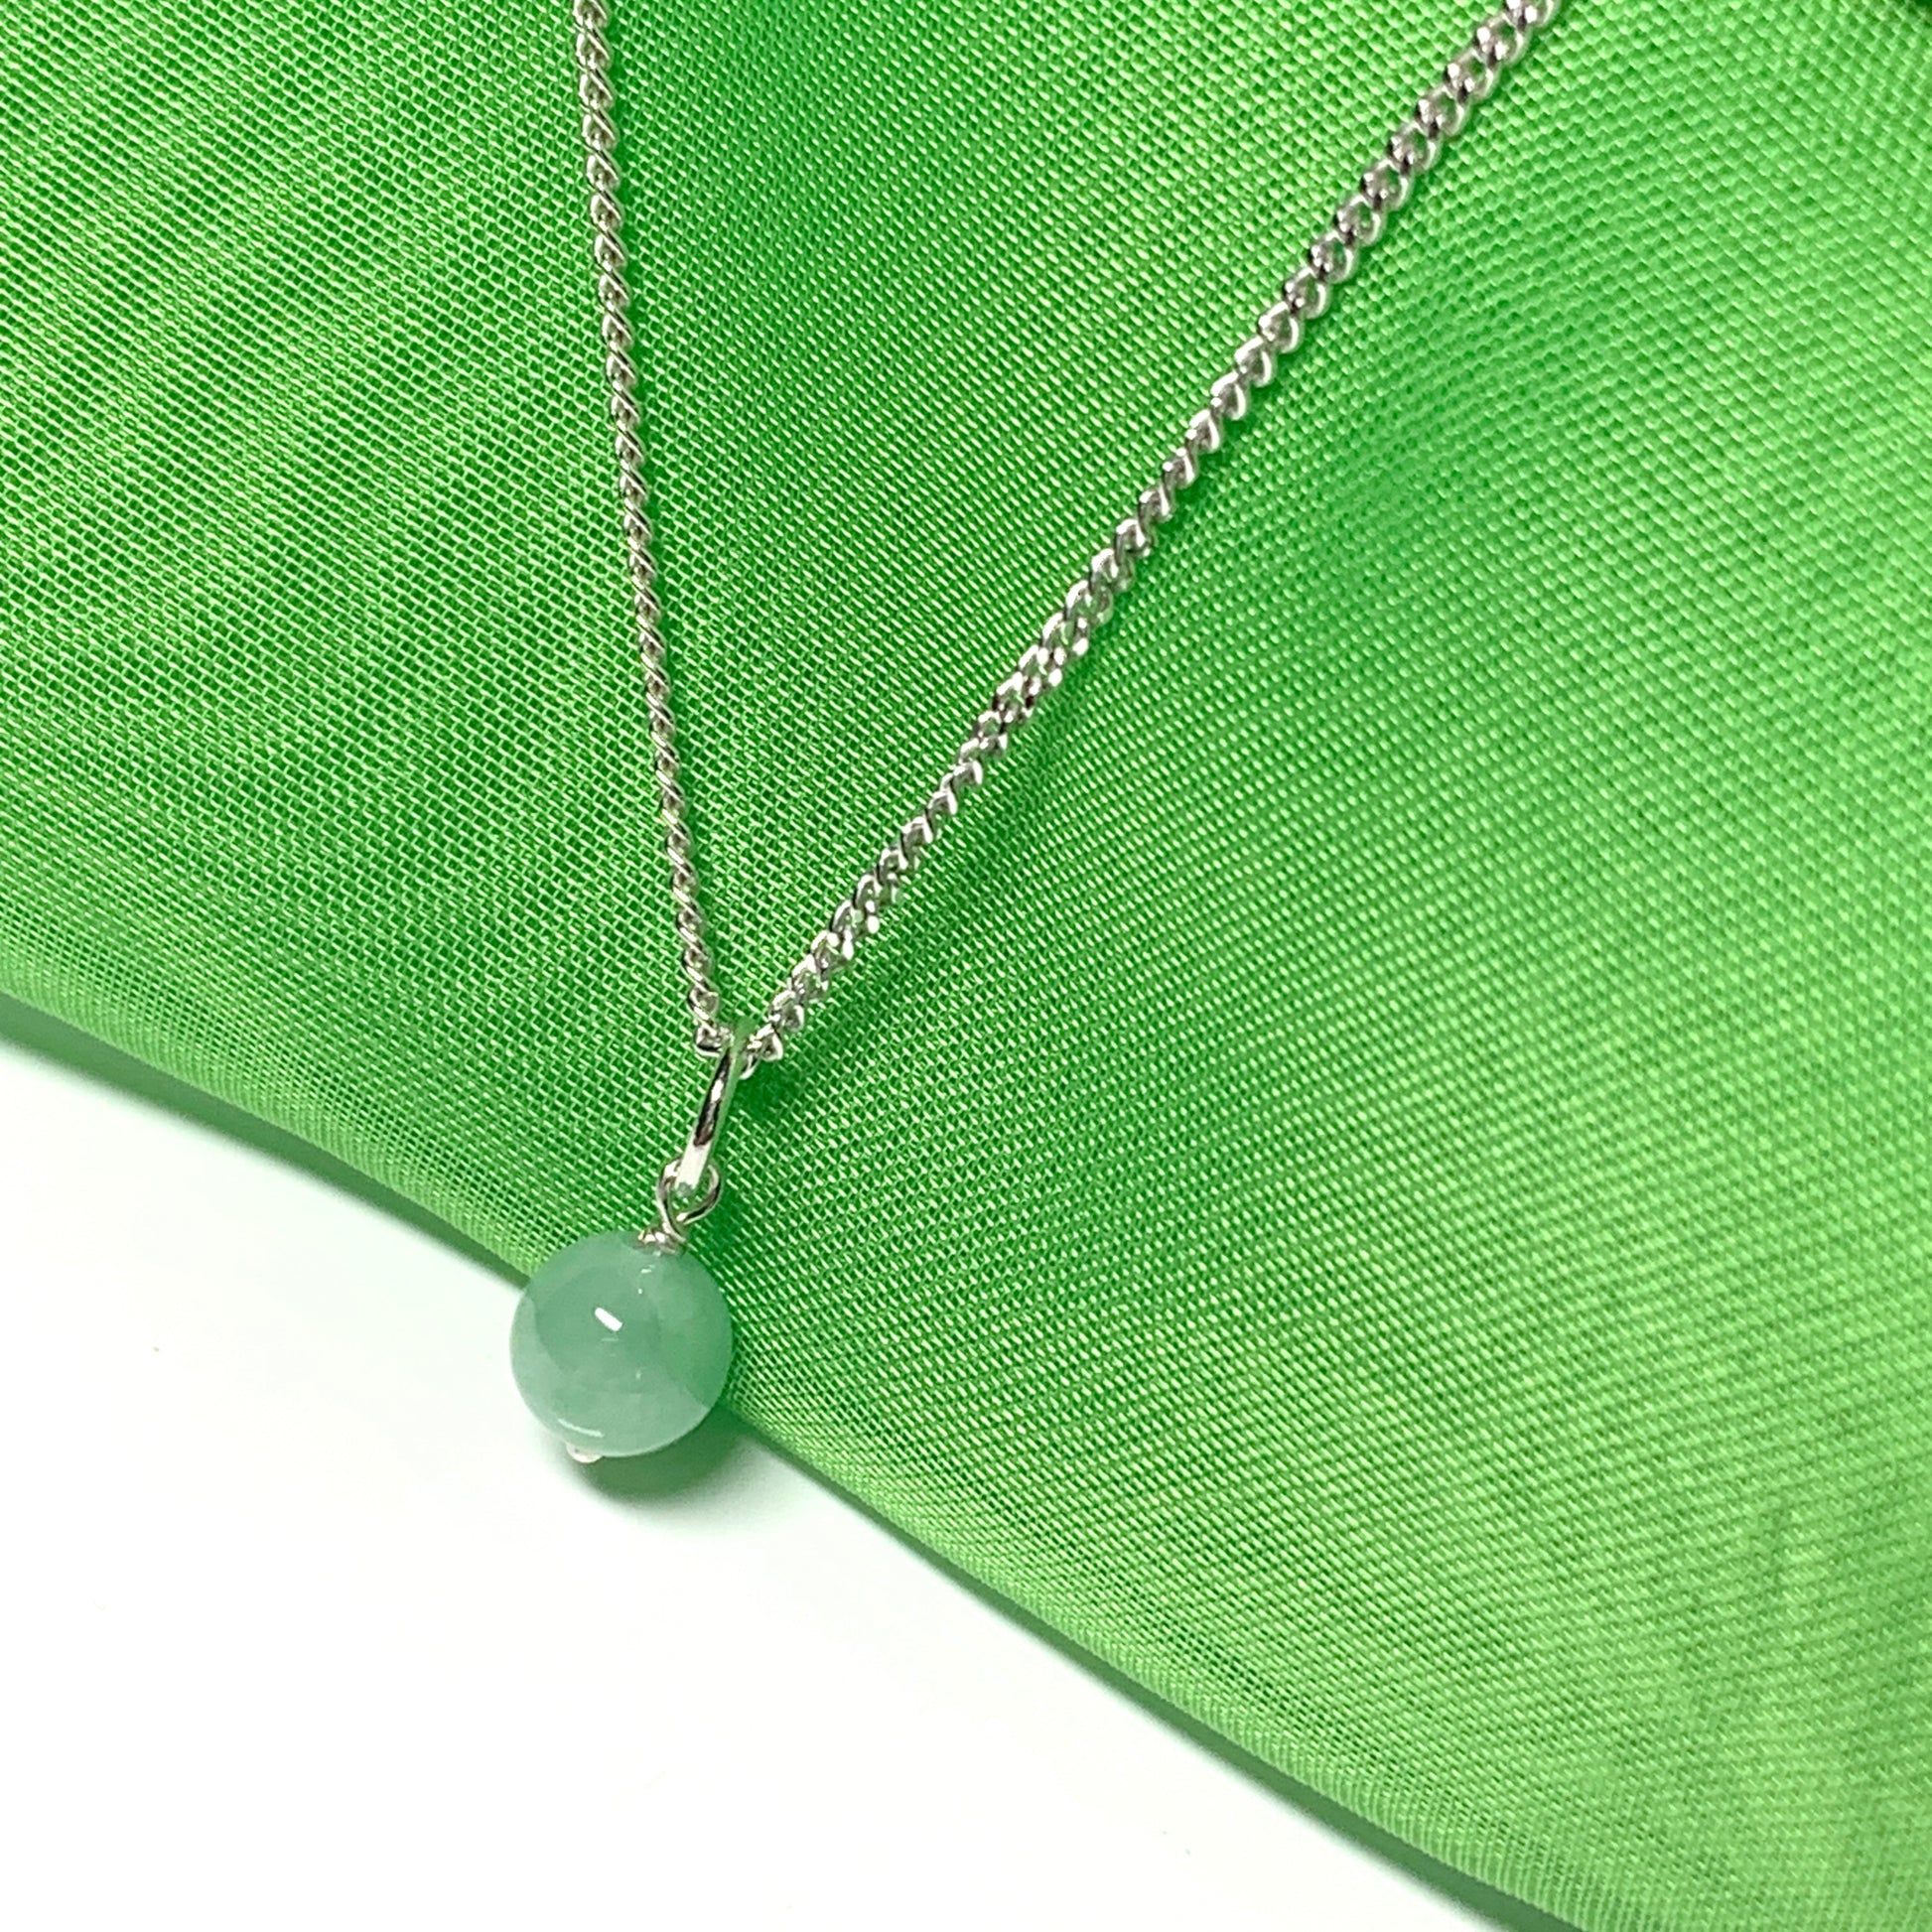 Small real green jade necklace round ball shaped pendant